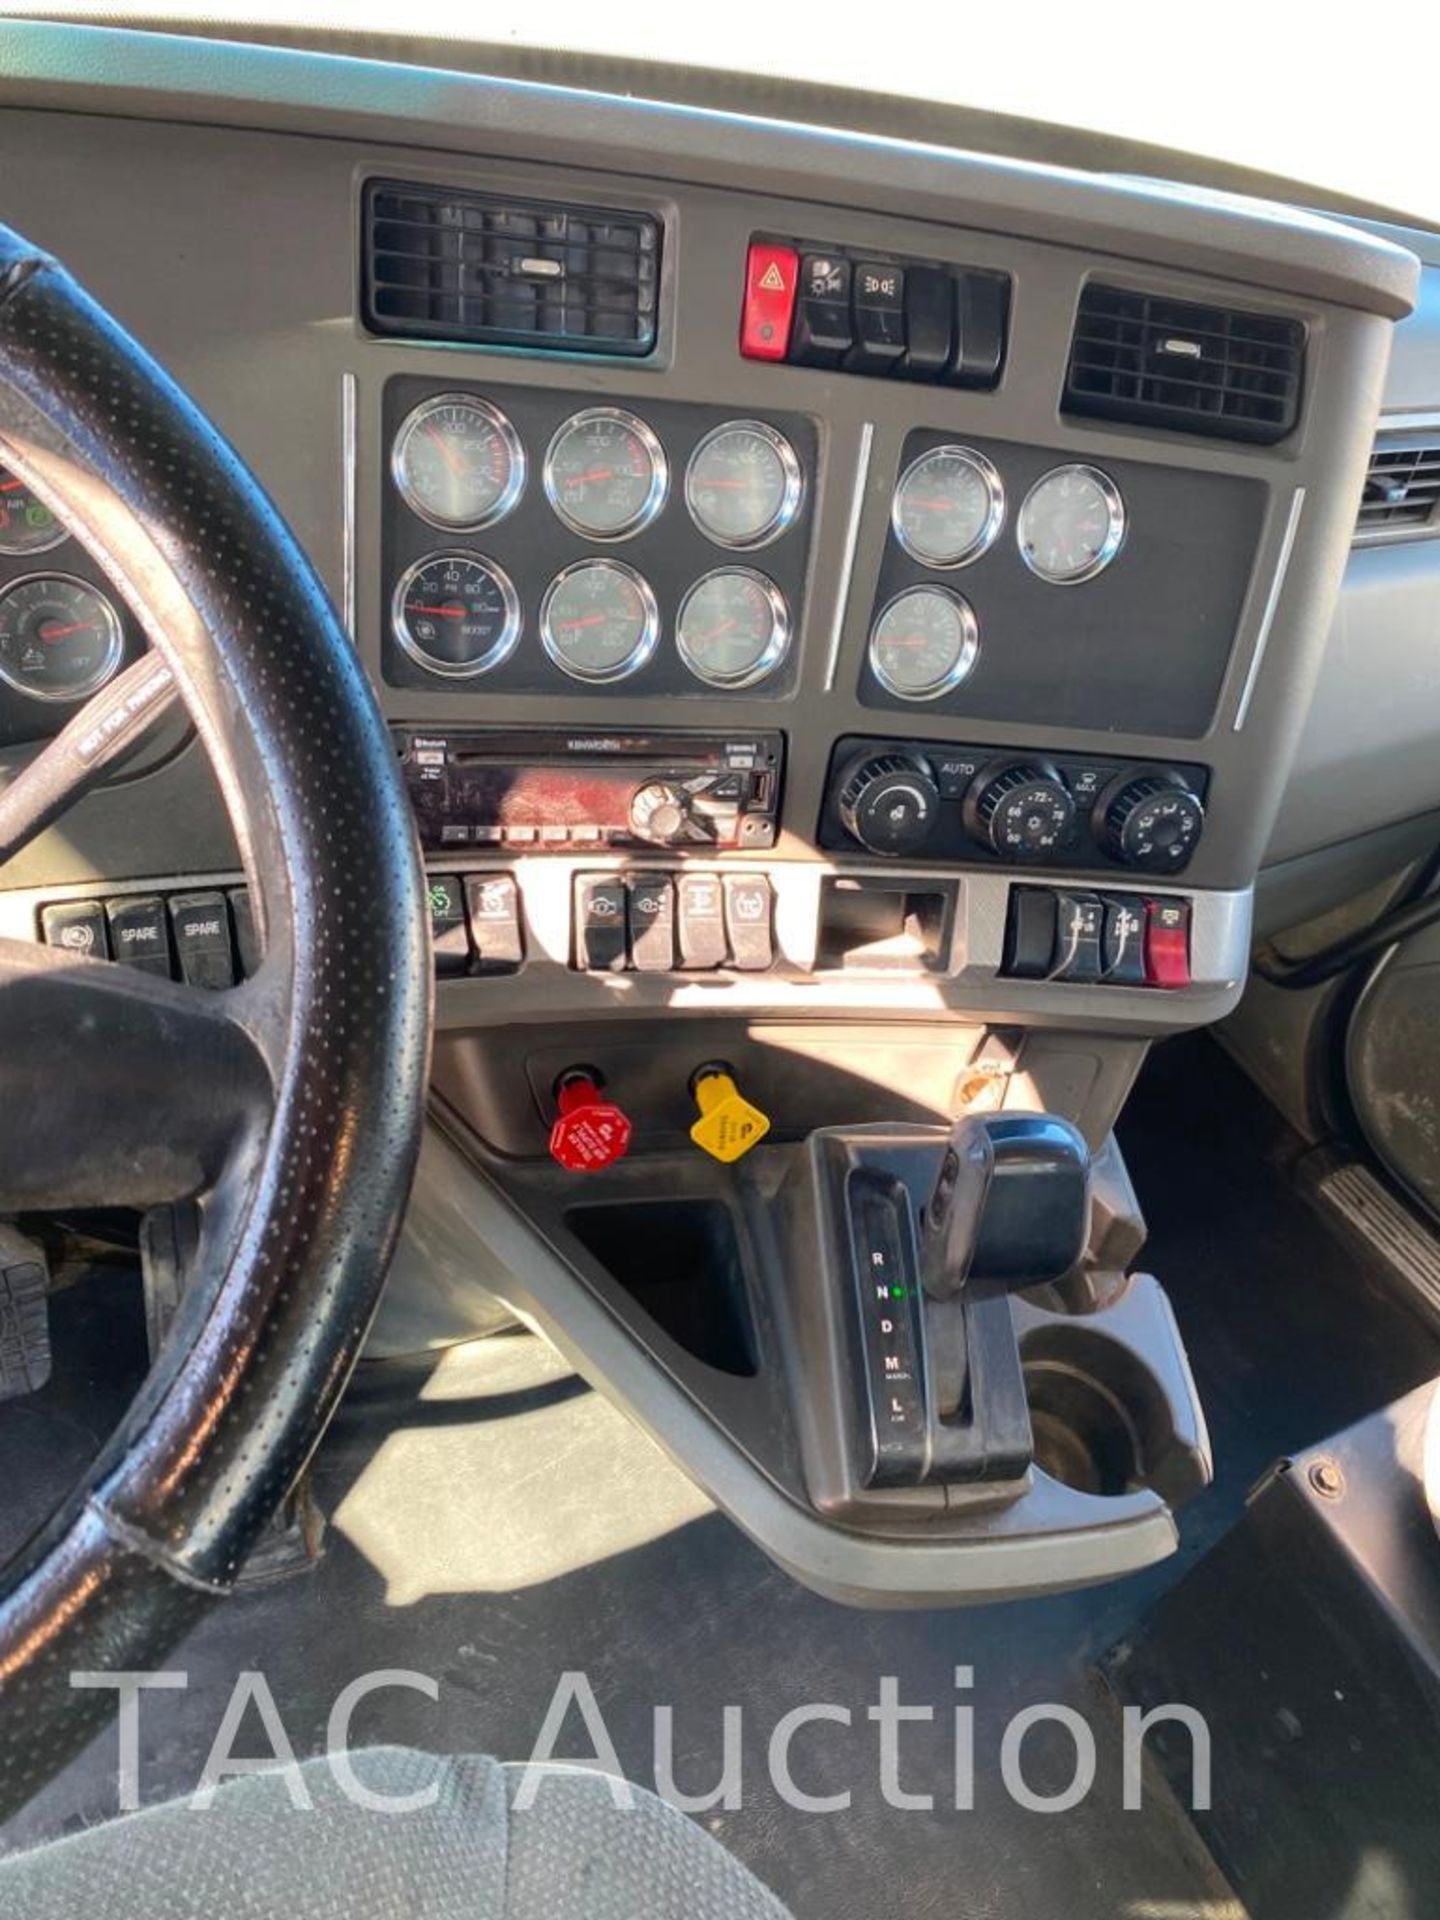 2018 Kenworth T880 Day Cab - Image 9 of 27